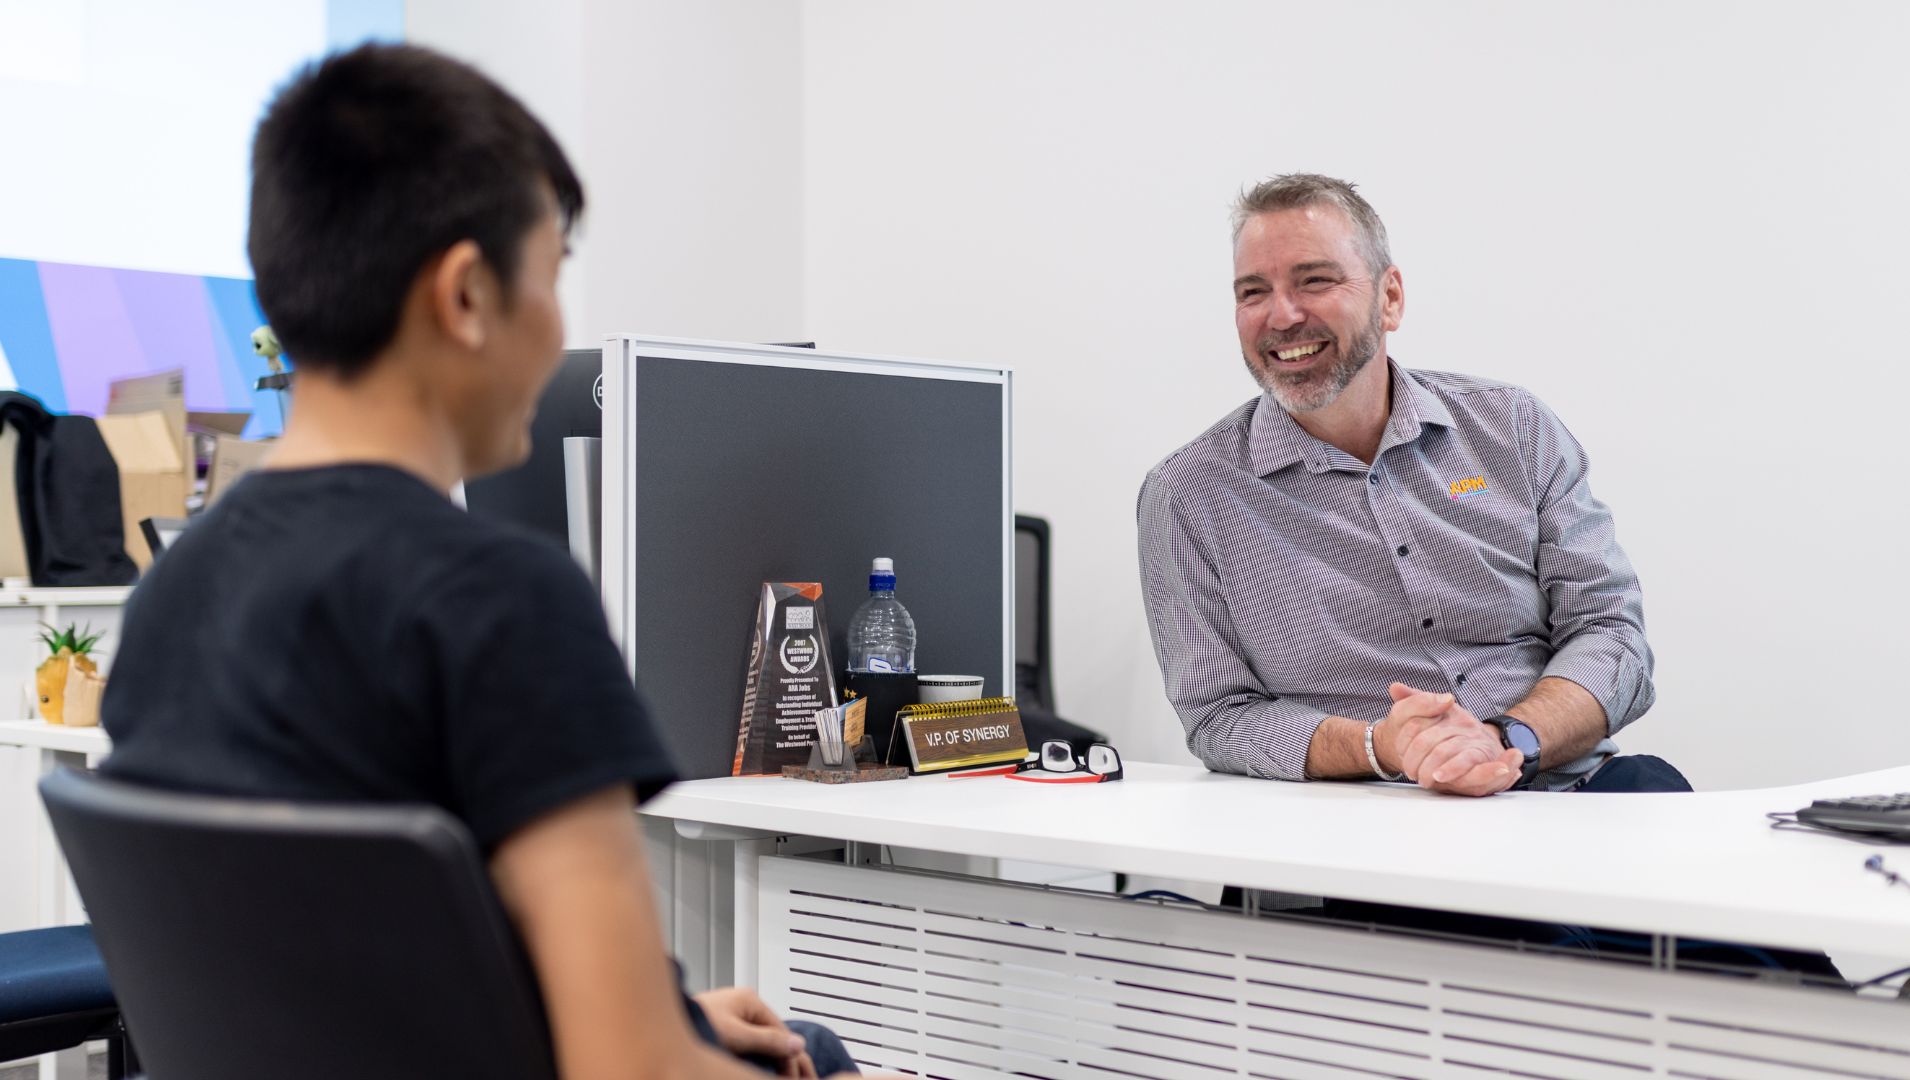 Paul from APM smiles with Sajad in an APM Employment Services office.